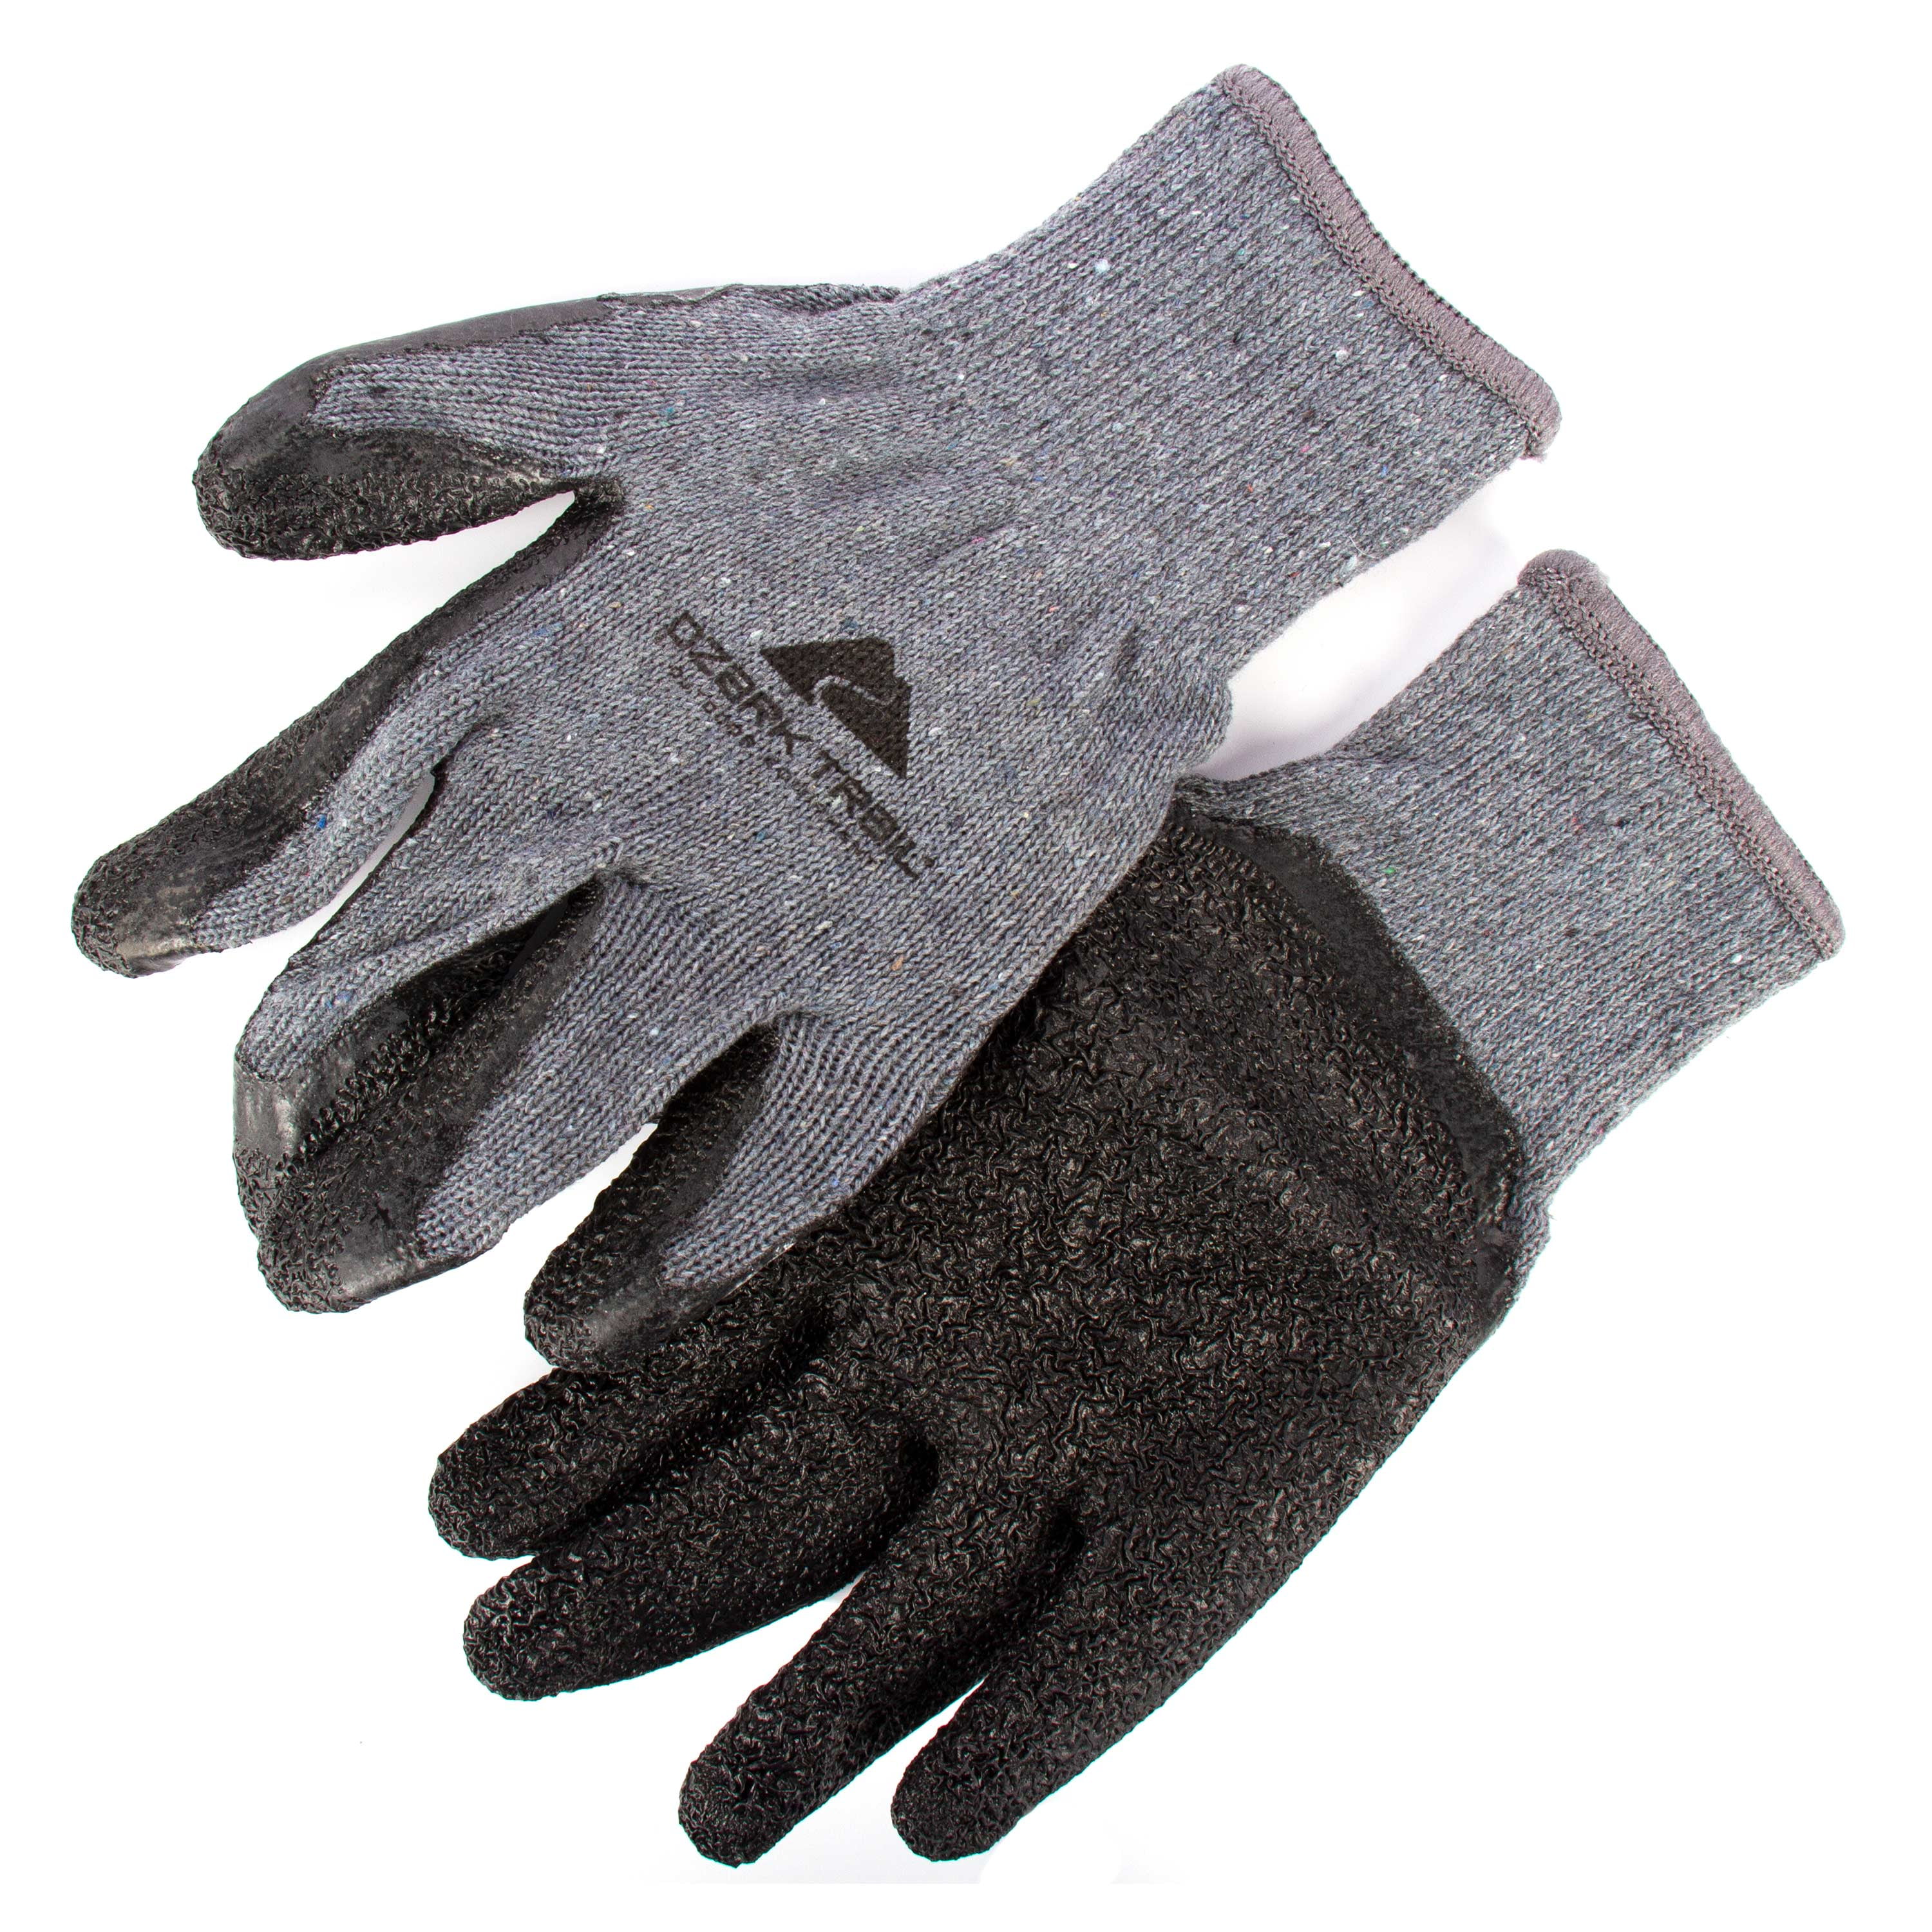 Ozark Trail Outdoor Rubber-Coated Fishing Gloves, Palestine